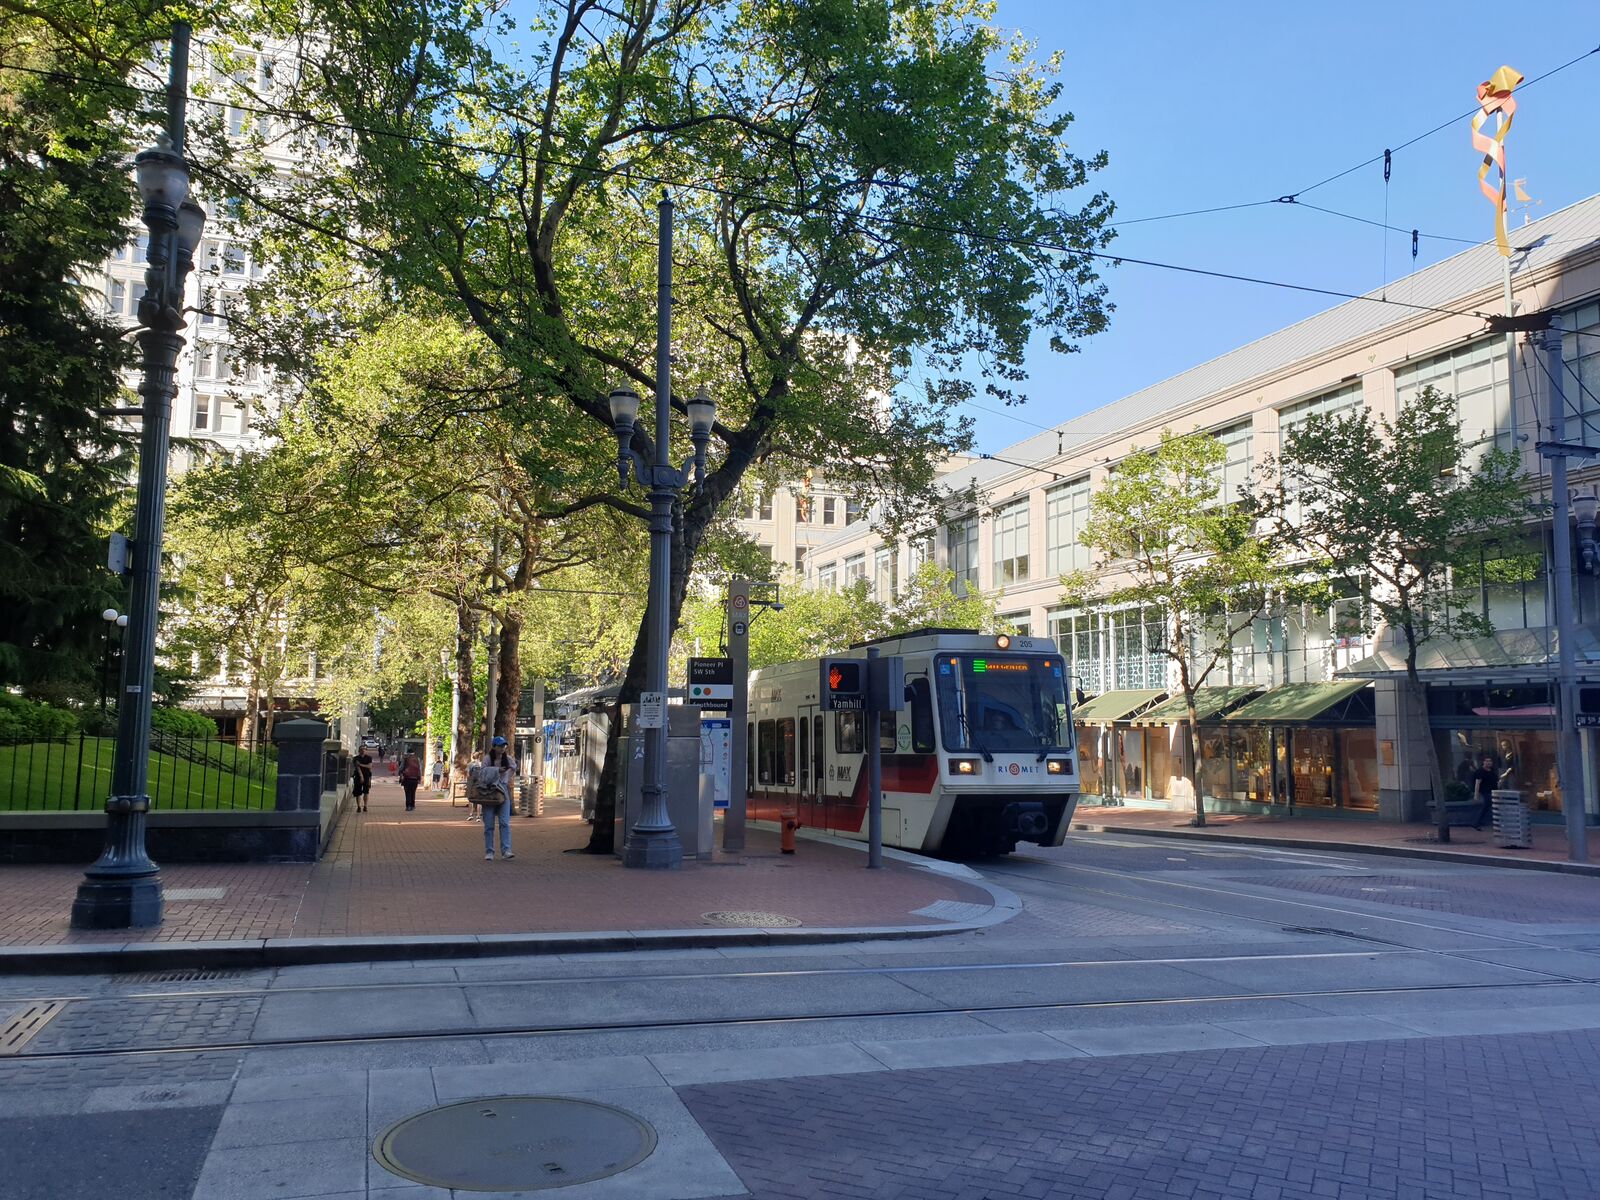 Trams are called “light rail” in America.